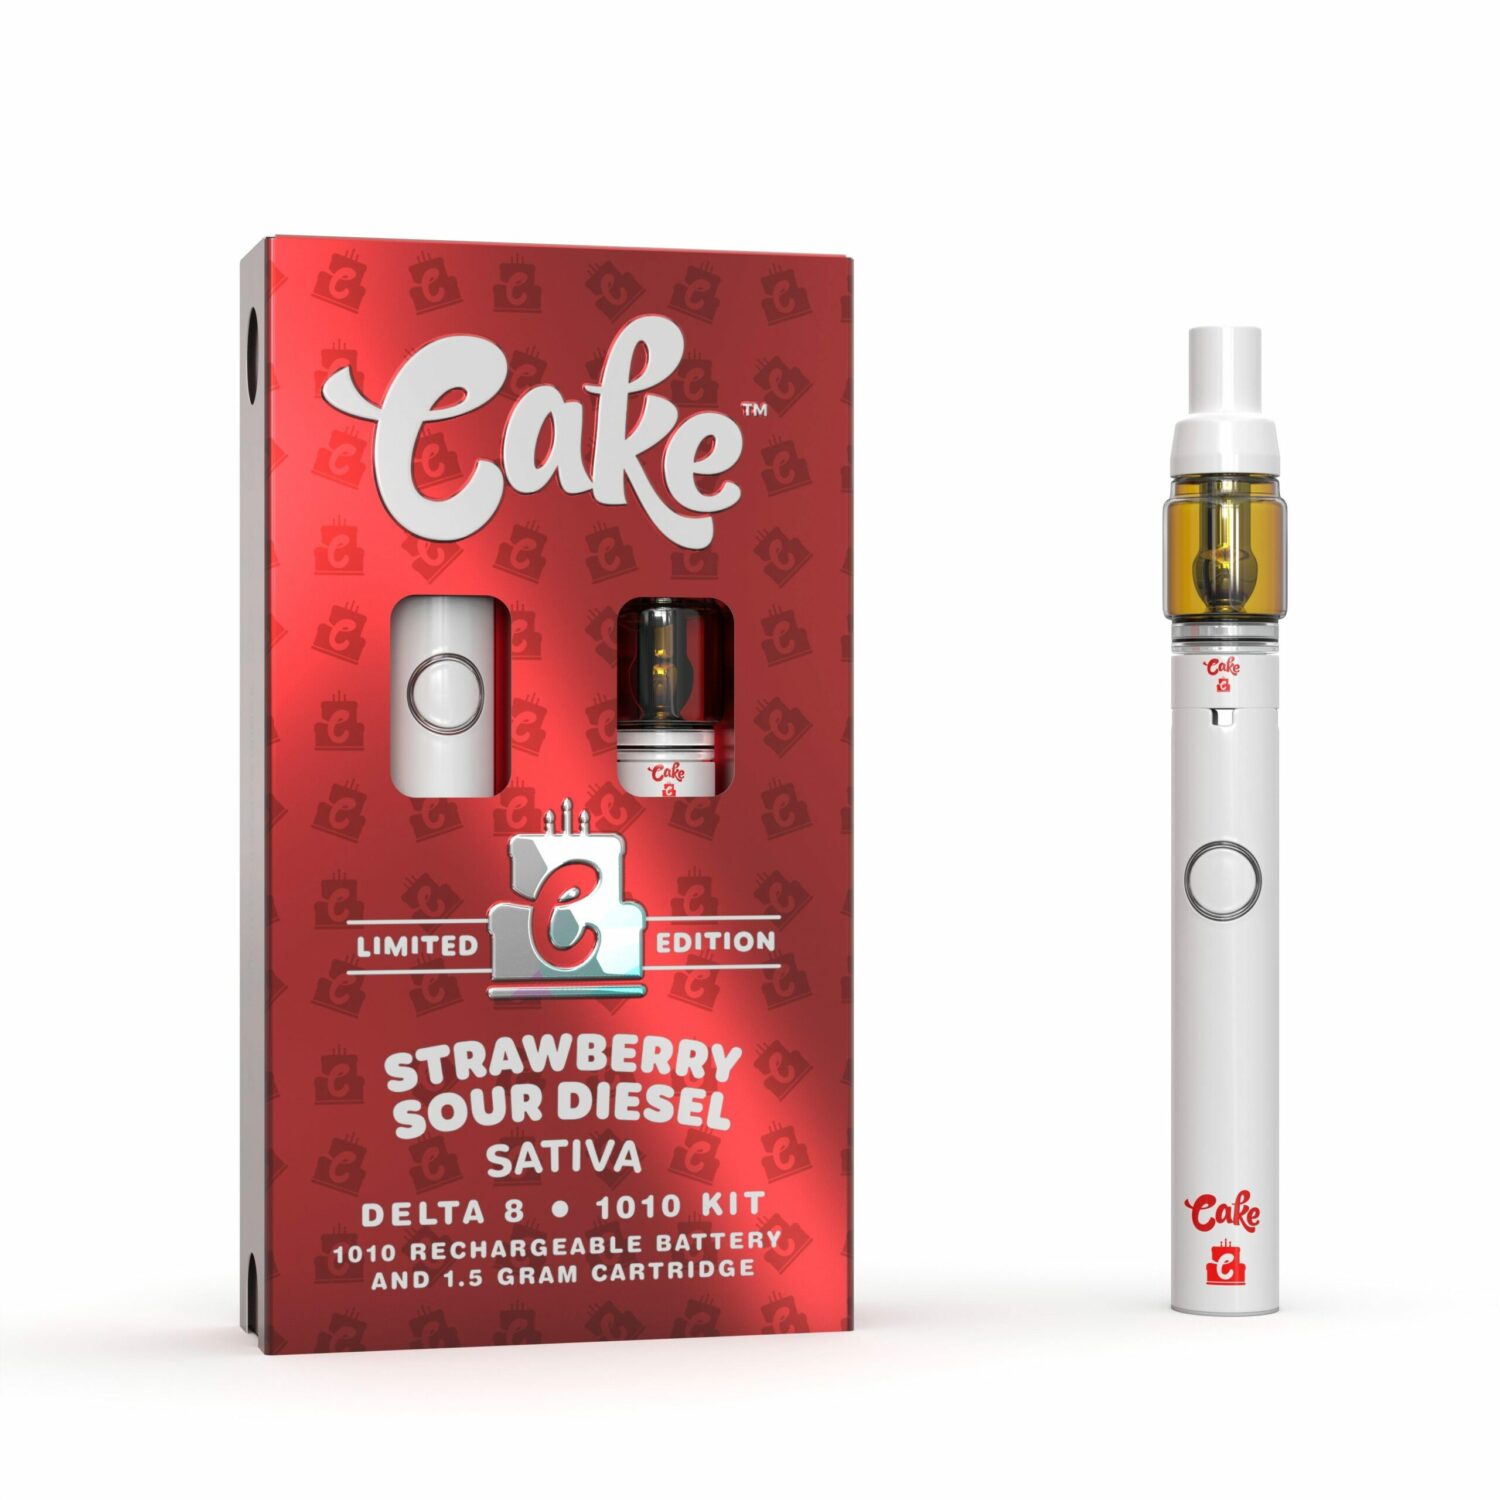 D8Gas-Cake-Delta-8-1010-kit-Strawberry-Sour-Diesel-scaled-scaled-1.jpg